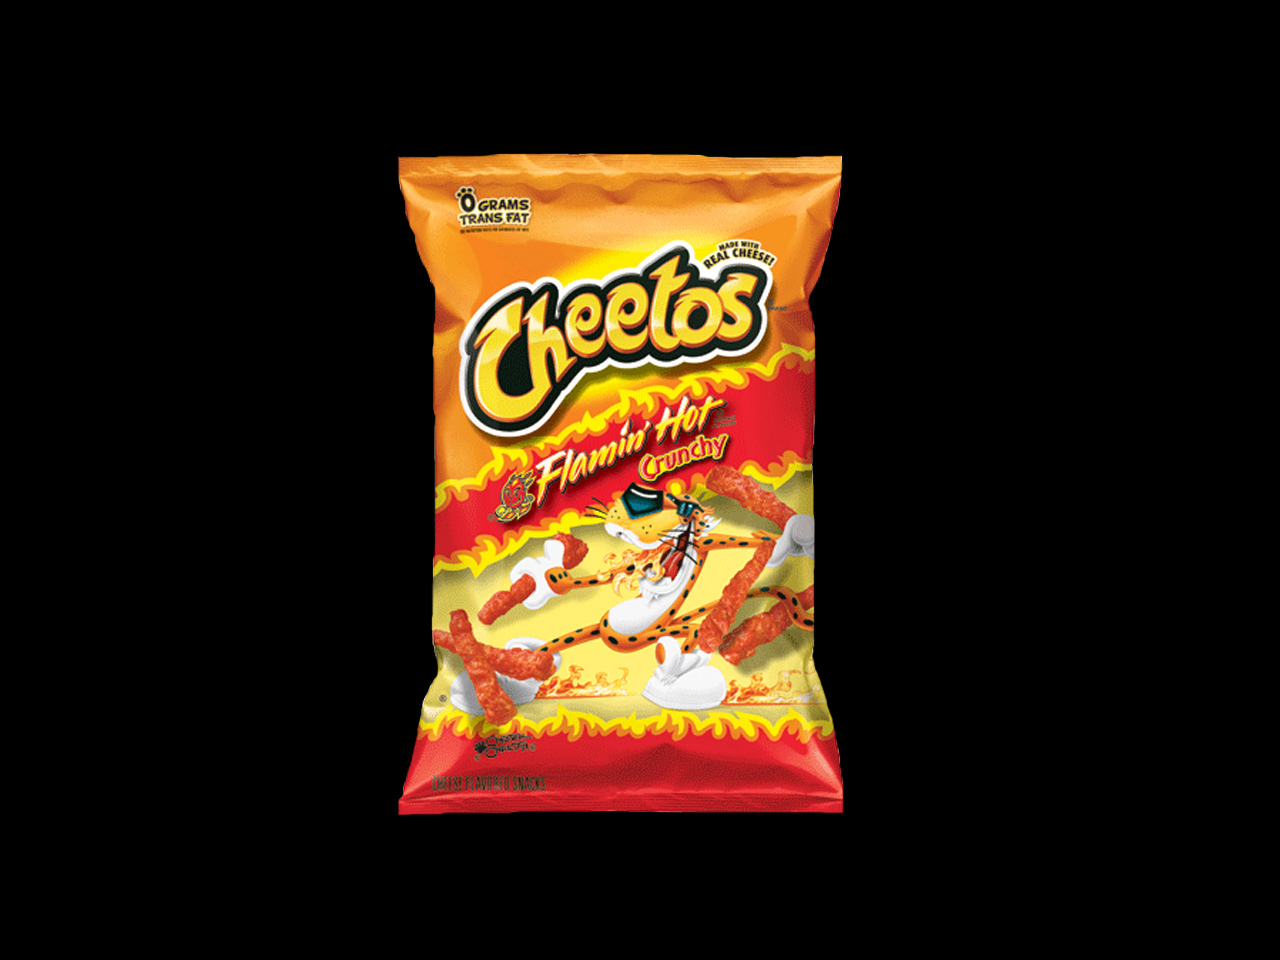 Cheetos Just Introduced Their Hottest Snack Ever